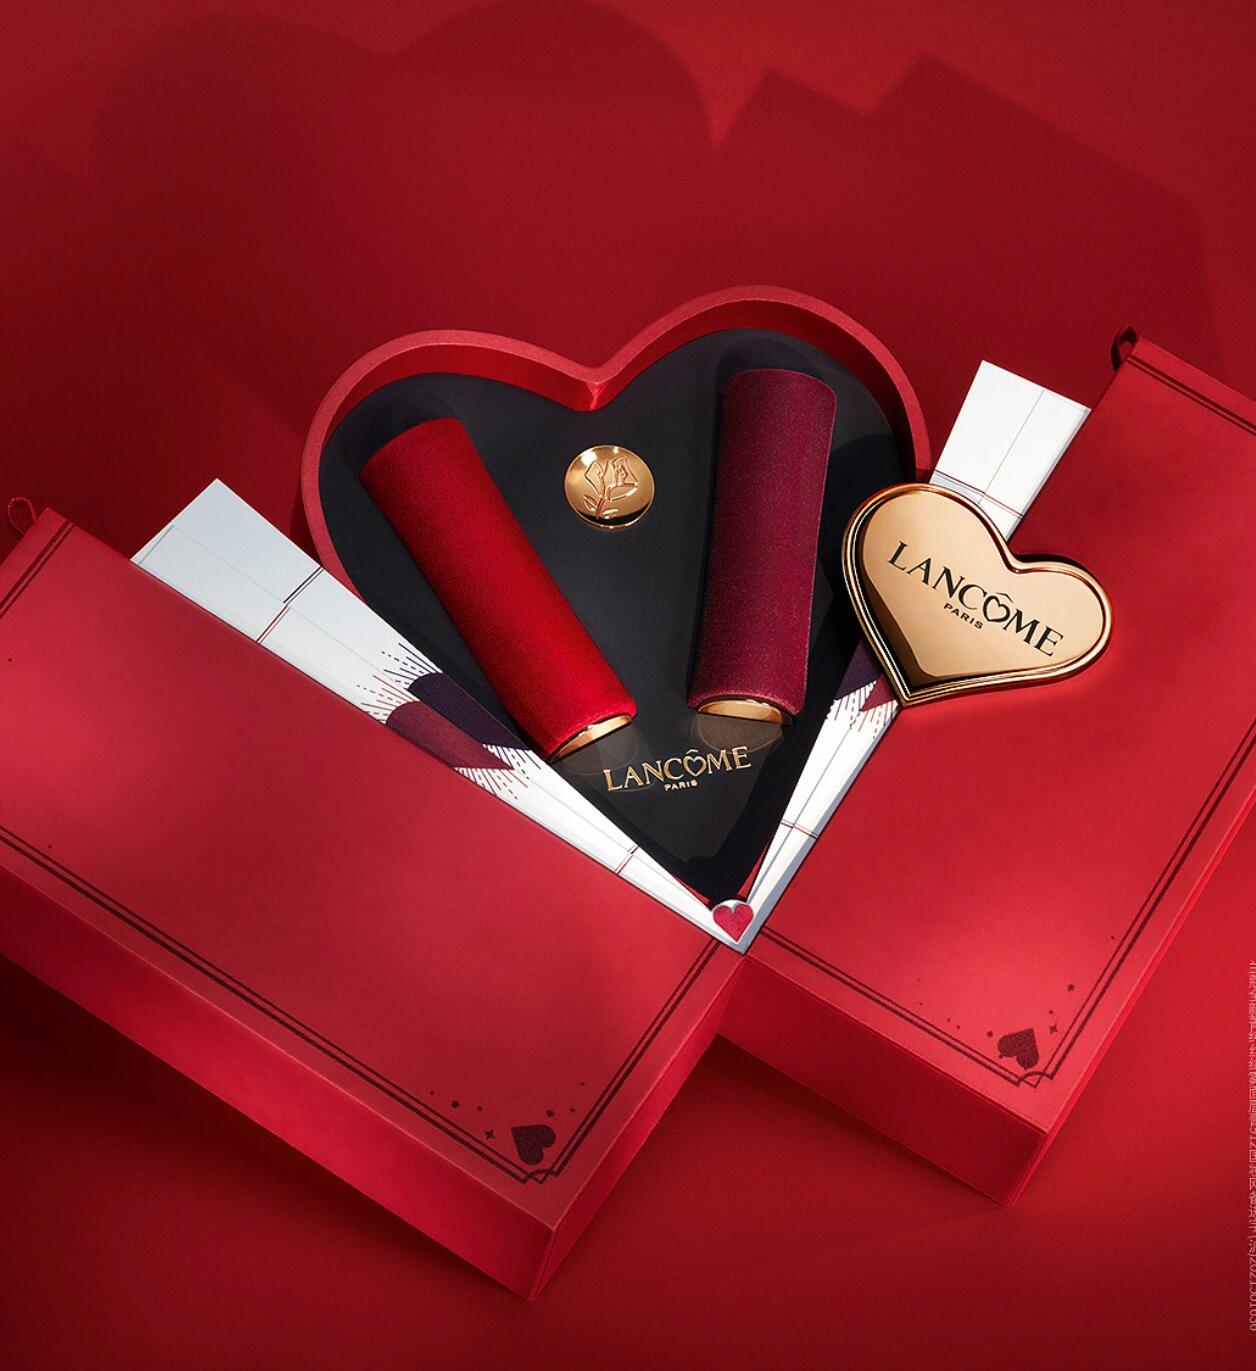 The Design Features and Trends of Valentine's Day Gift Boxes